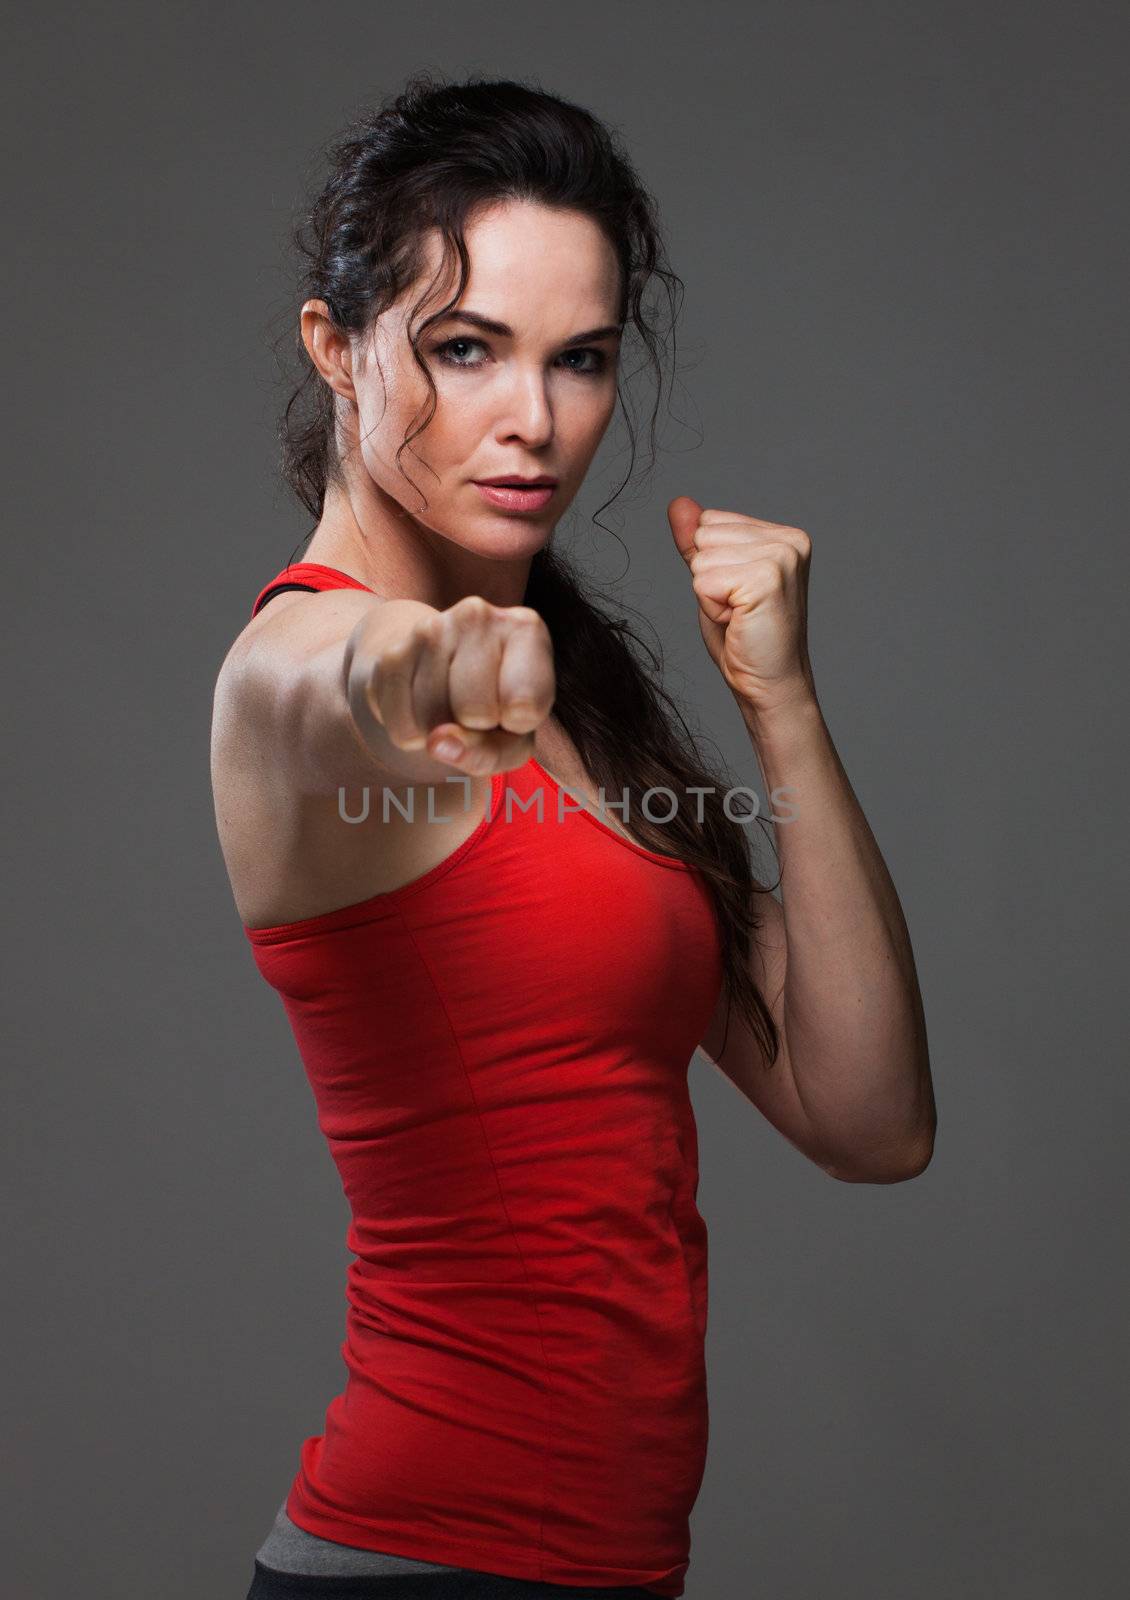 An attractive sexy woman throwing a punch during boxing exercise